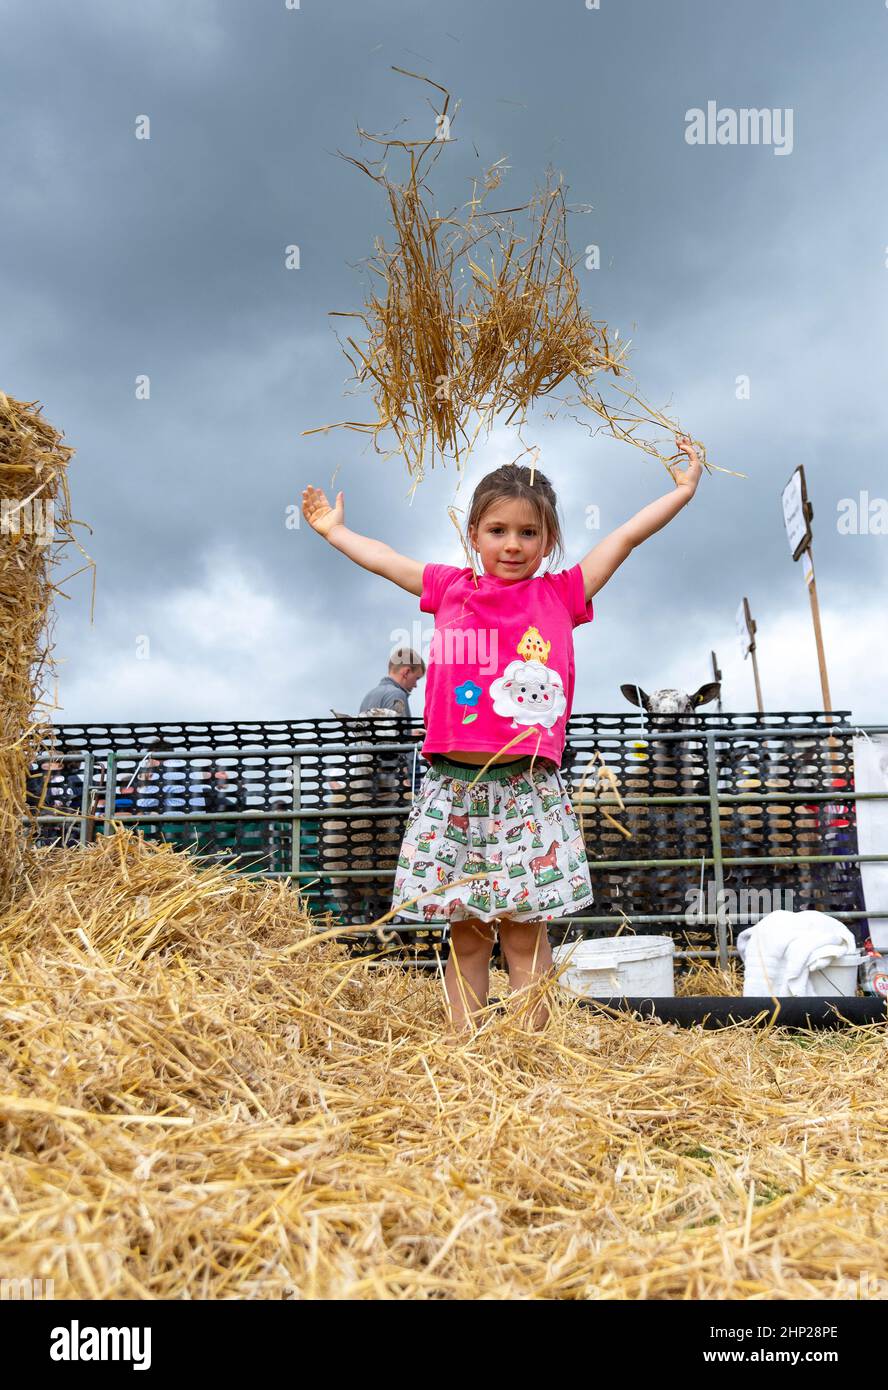 Young girls playing in a bale of straw at an agricultural show, Kelso, Scottish Borders, UK. Stock Photo